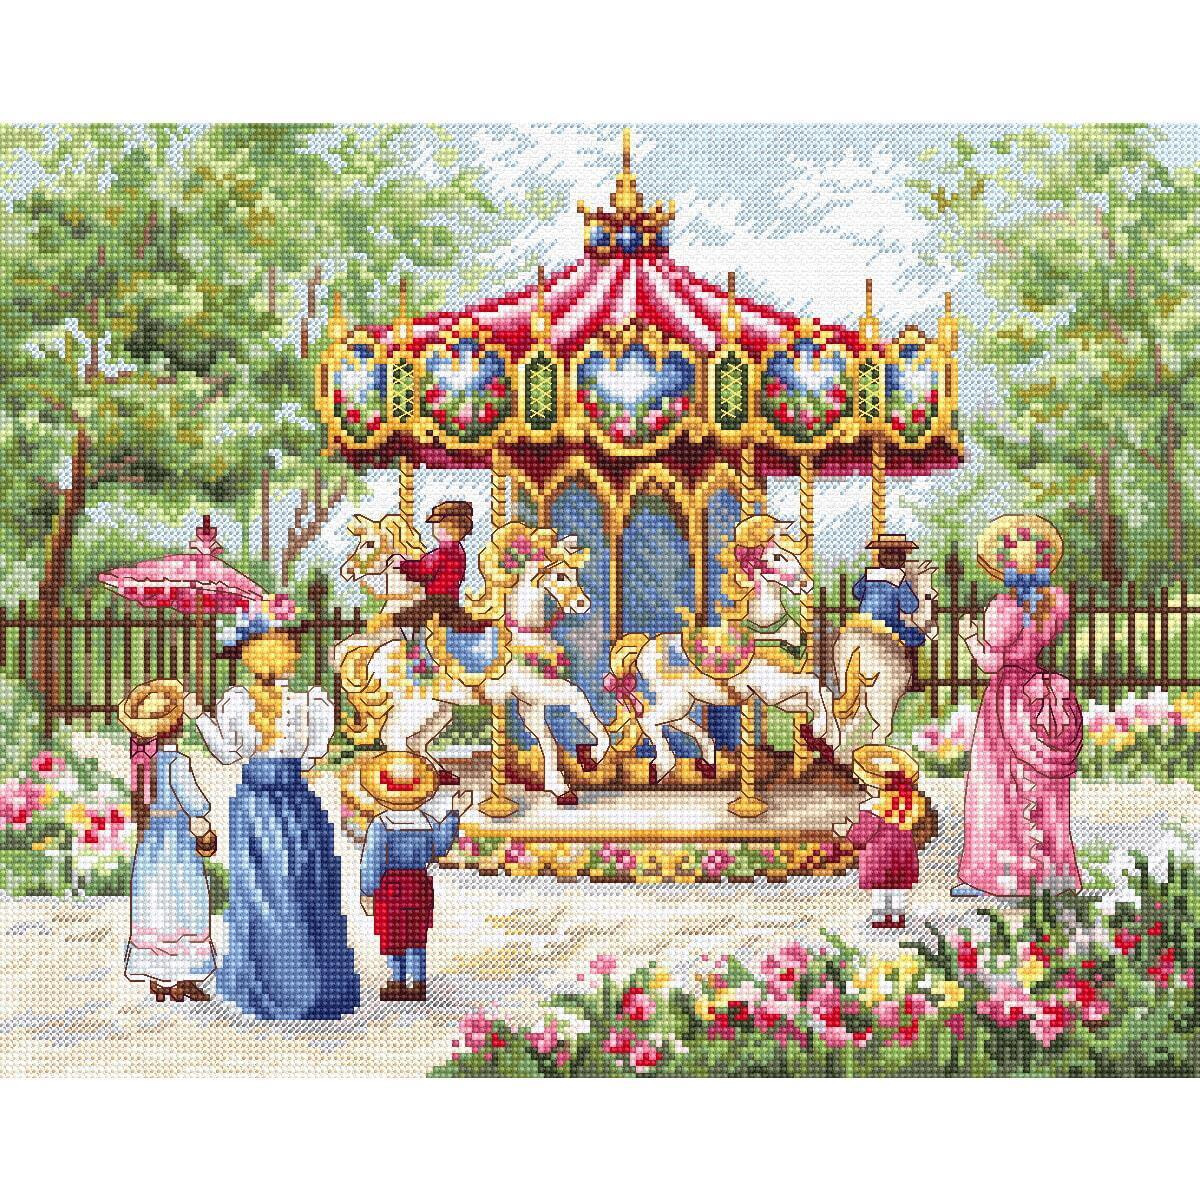 Letistitch counted cross stitch kit "Magical...